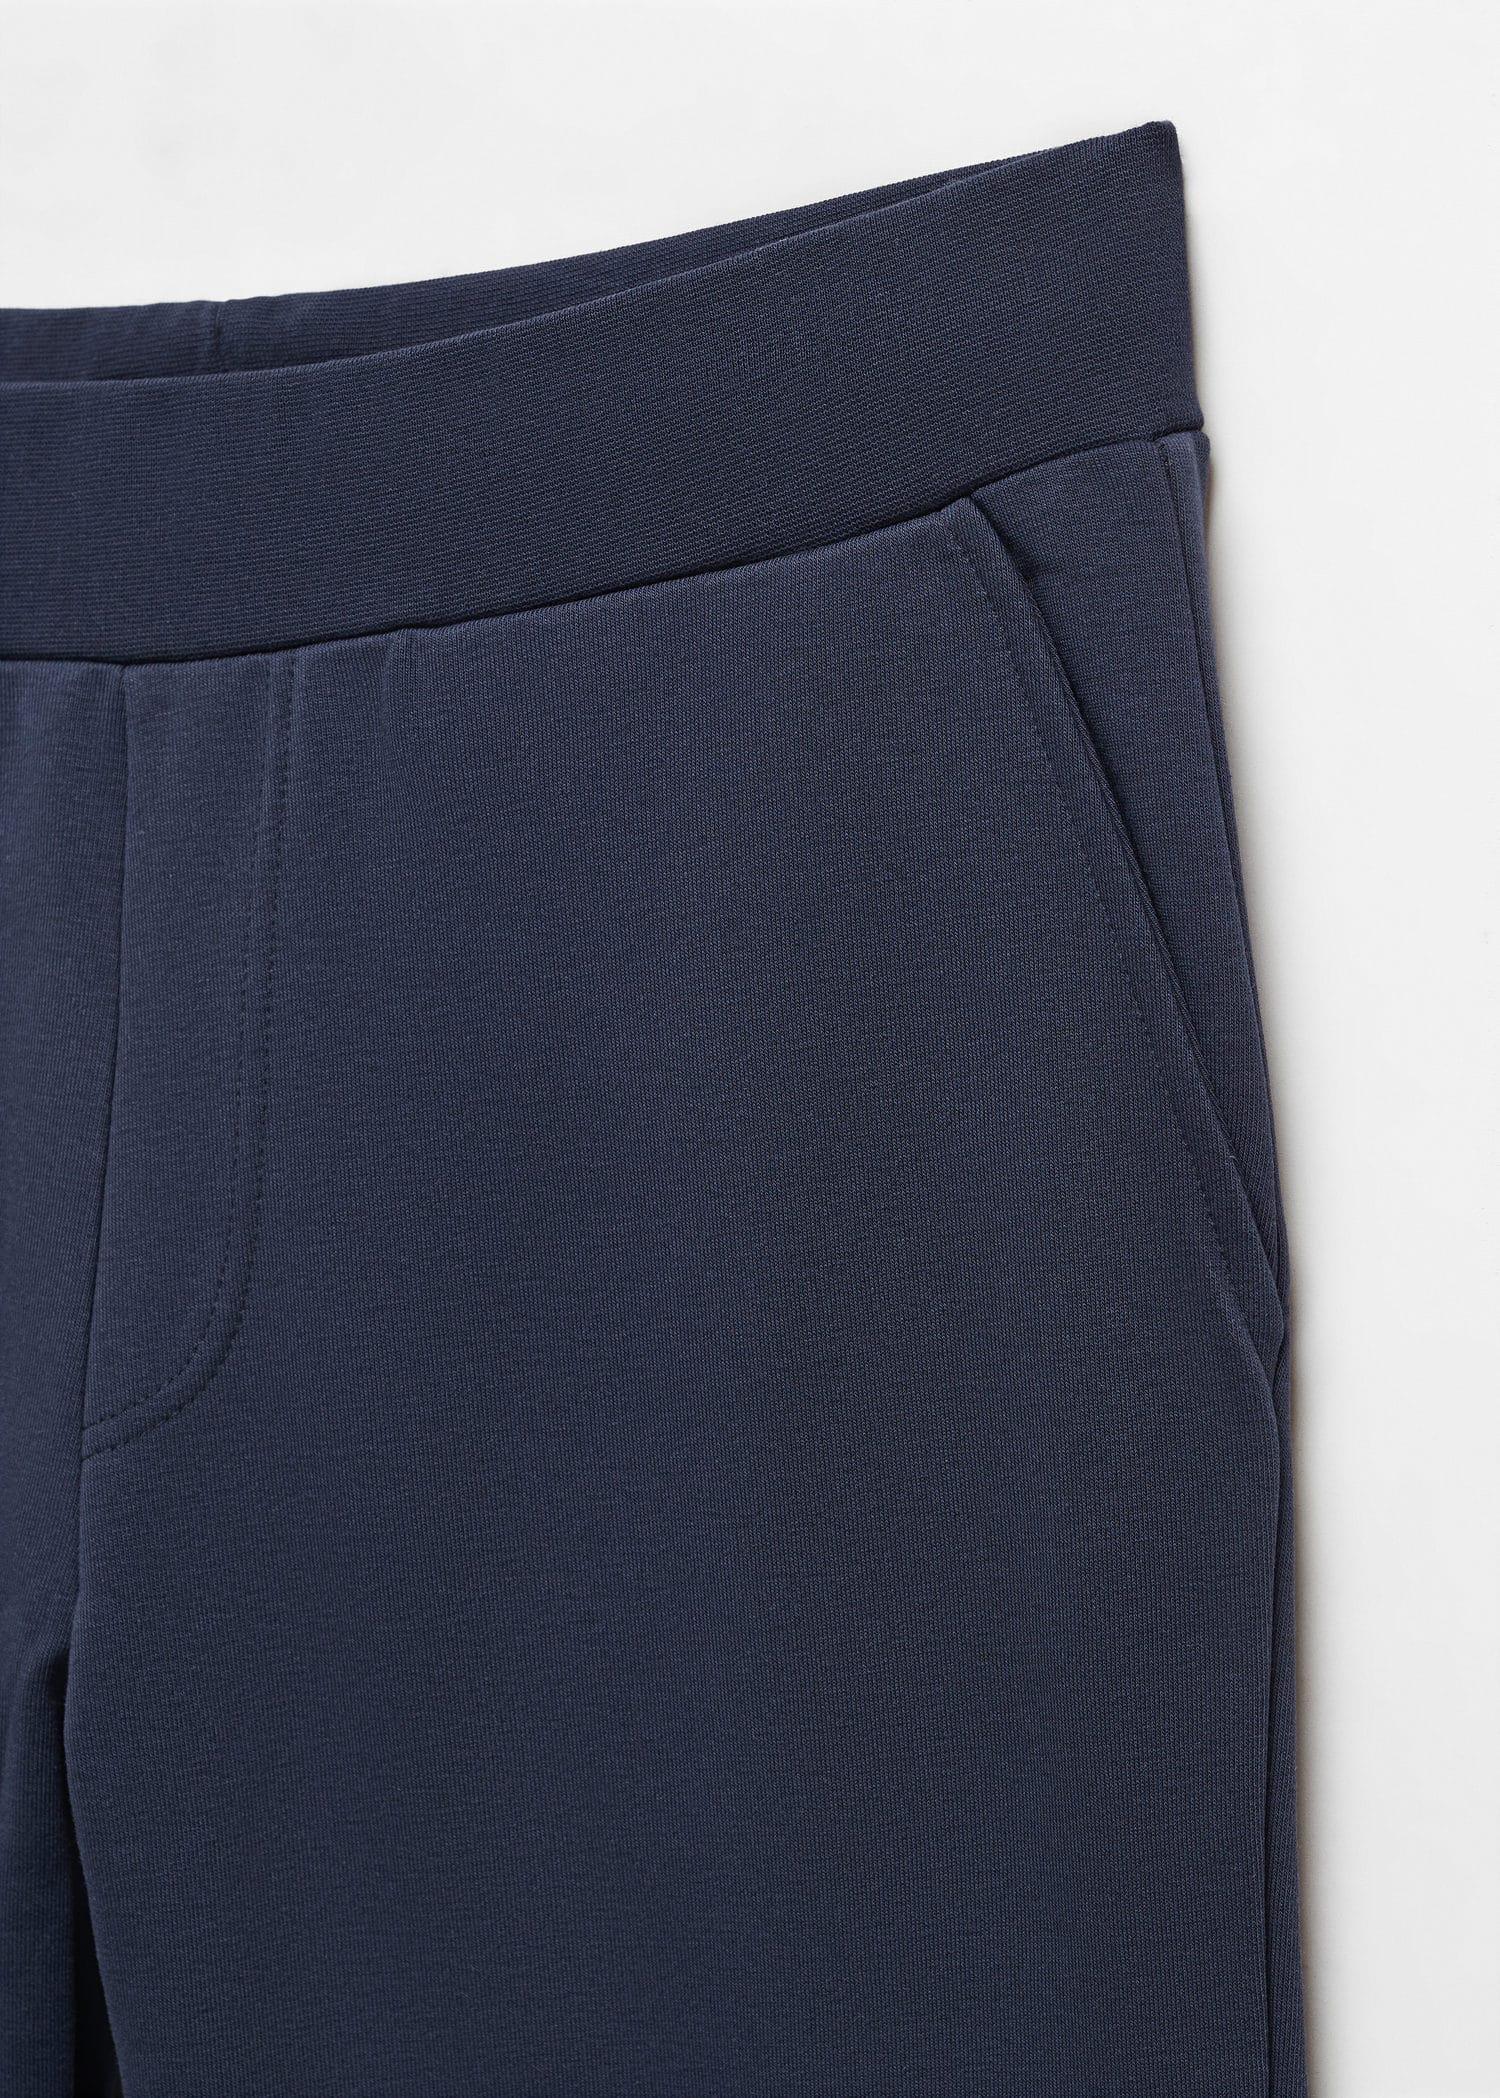 Mango - Navy Cotton Jogger-Style Trousers